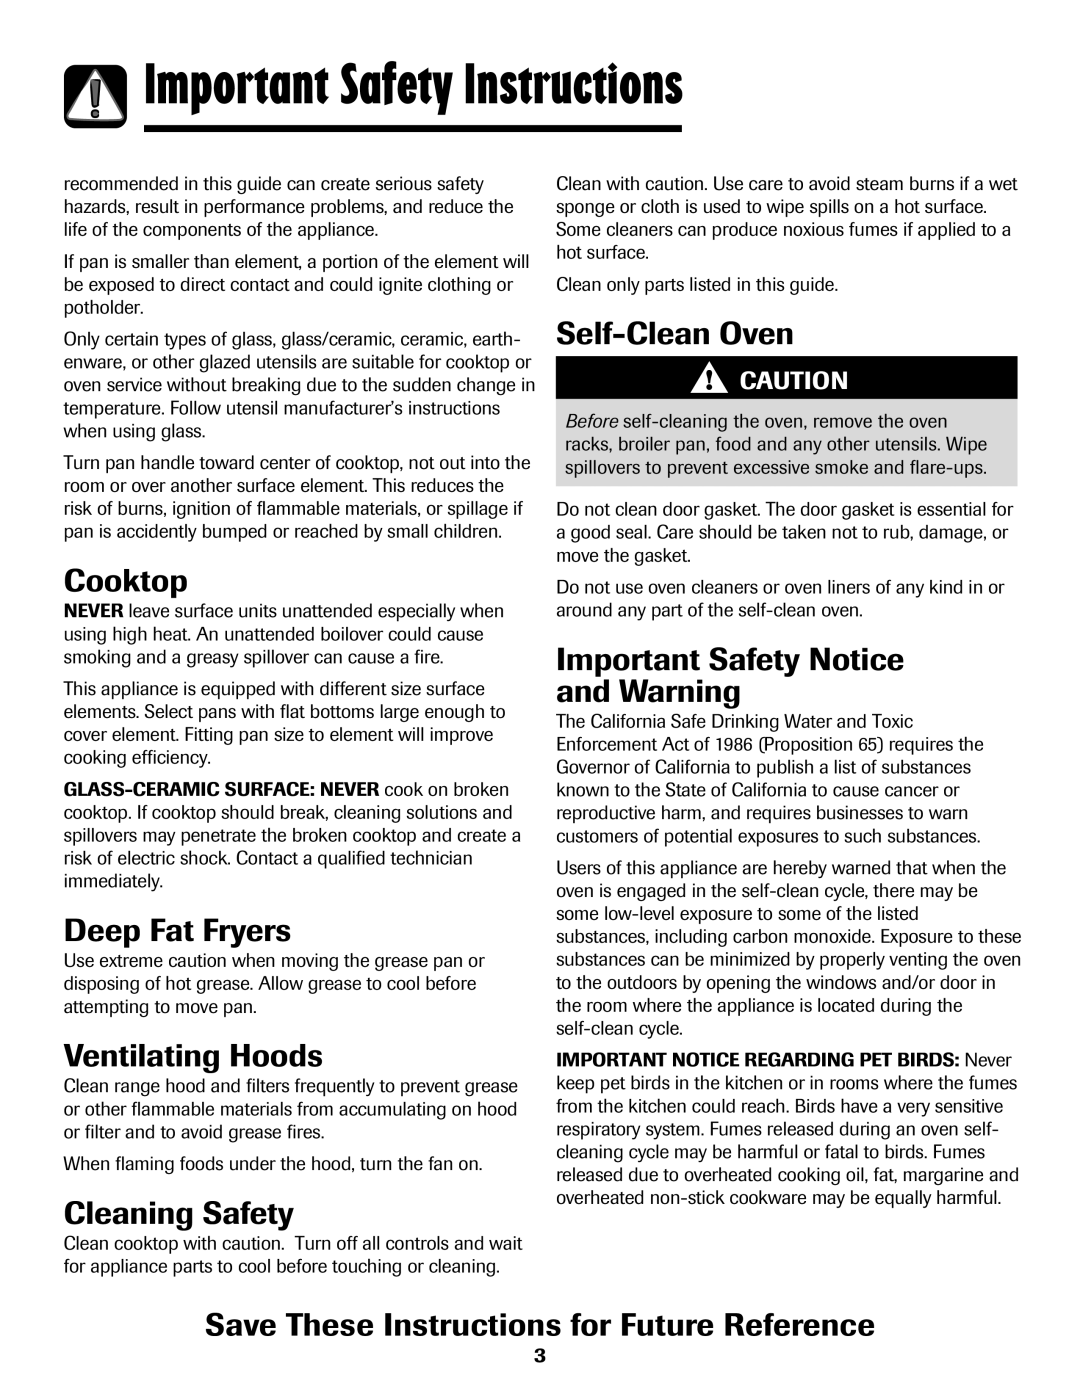 Amana 8113P598-60 manual Self-Clean Oven, Cooktop, Deep Fat Fryers, Important Safety Notice and Warning, Ventilating Hoods 